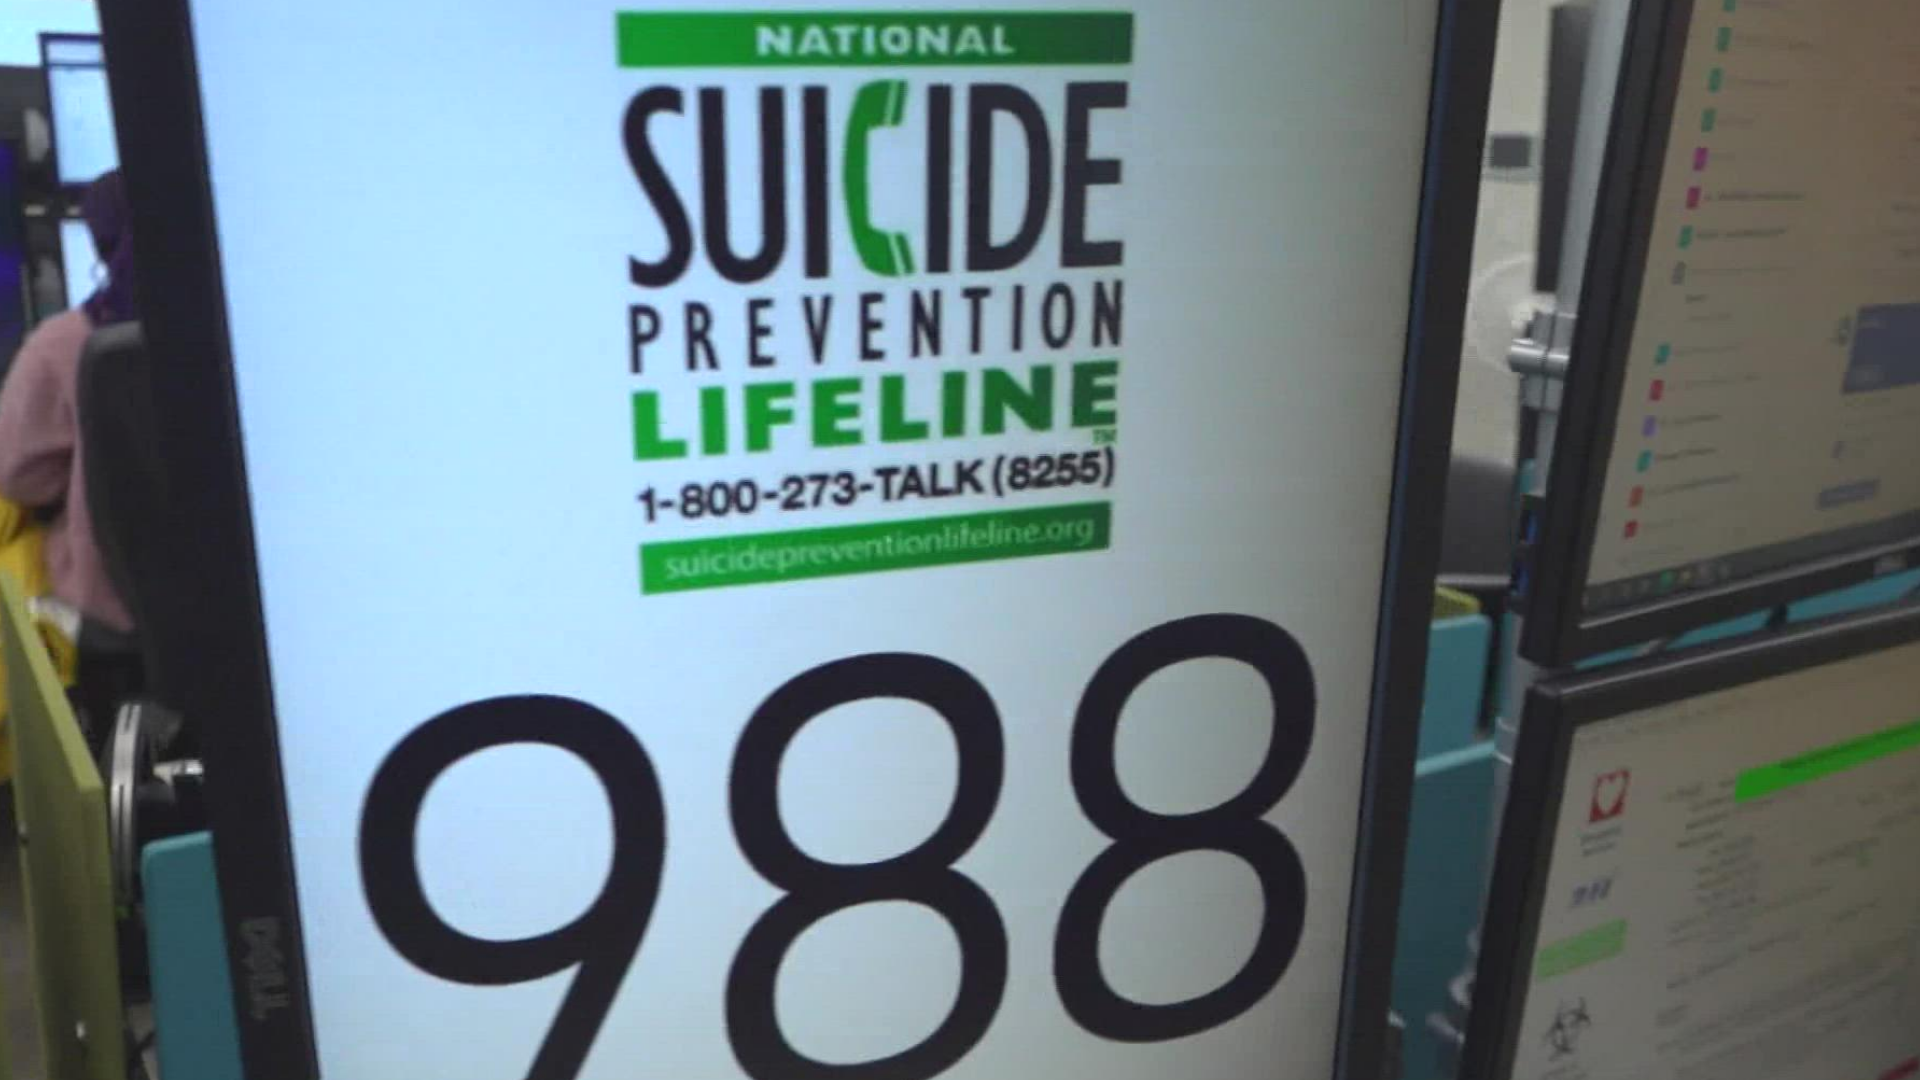 In July, experts shared their concerns that the new suicide prevention hotline was understaffed and underfunded.